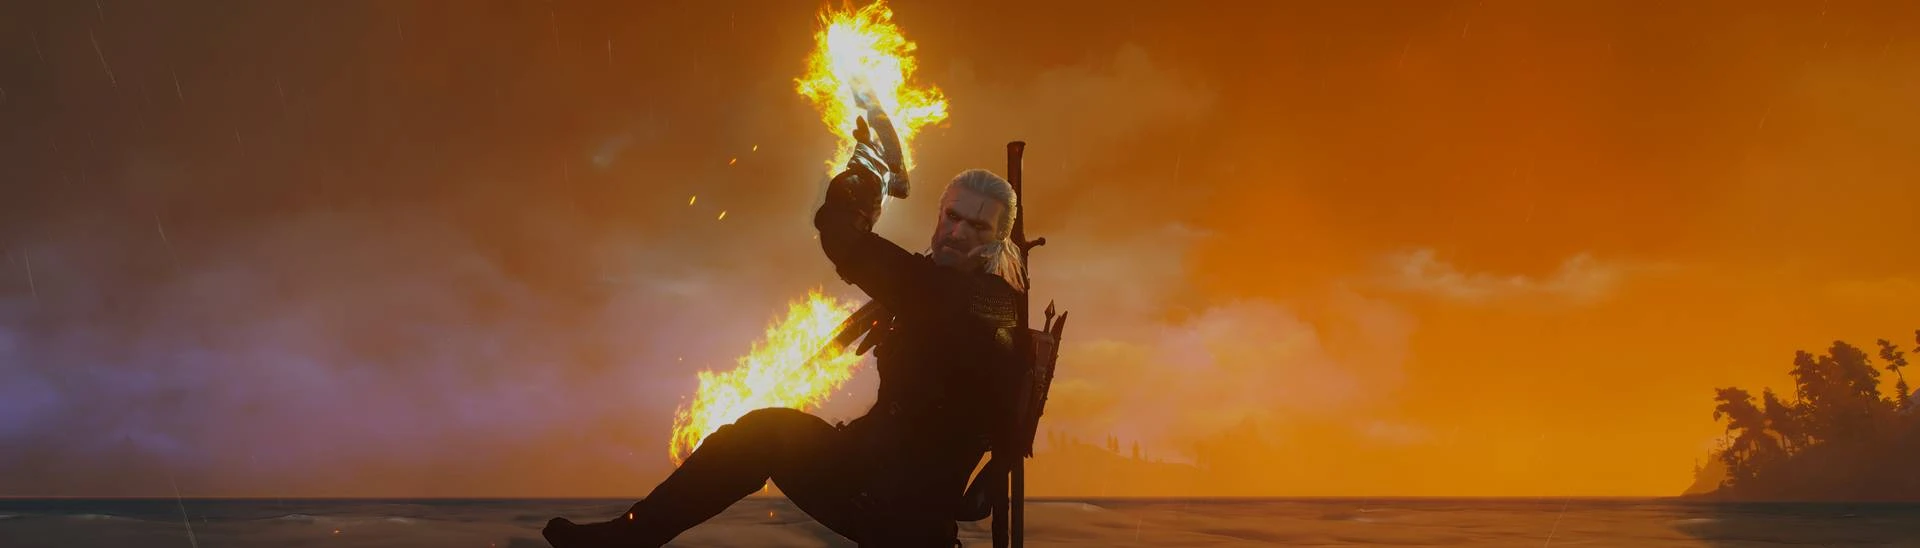 Beat the Wild Hunt V.2.0 Reborn available at The Witcher 3 Nexus